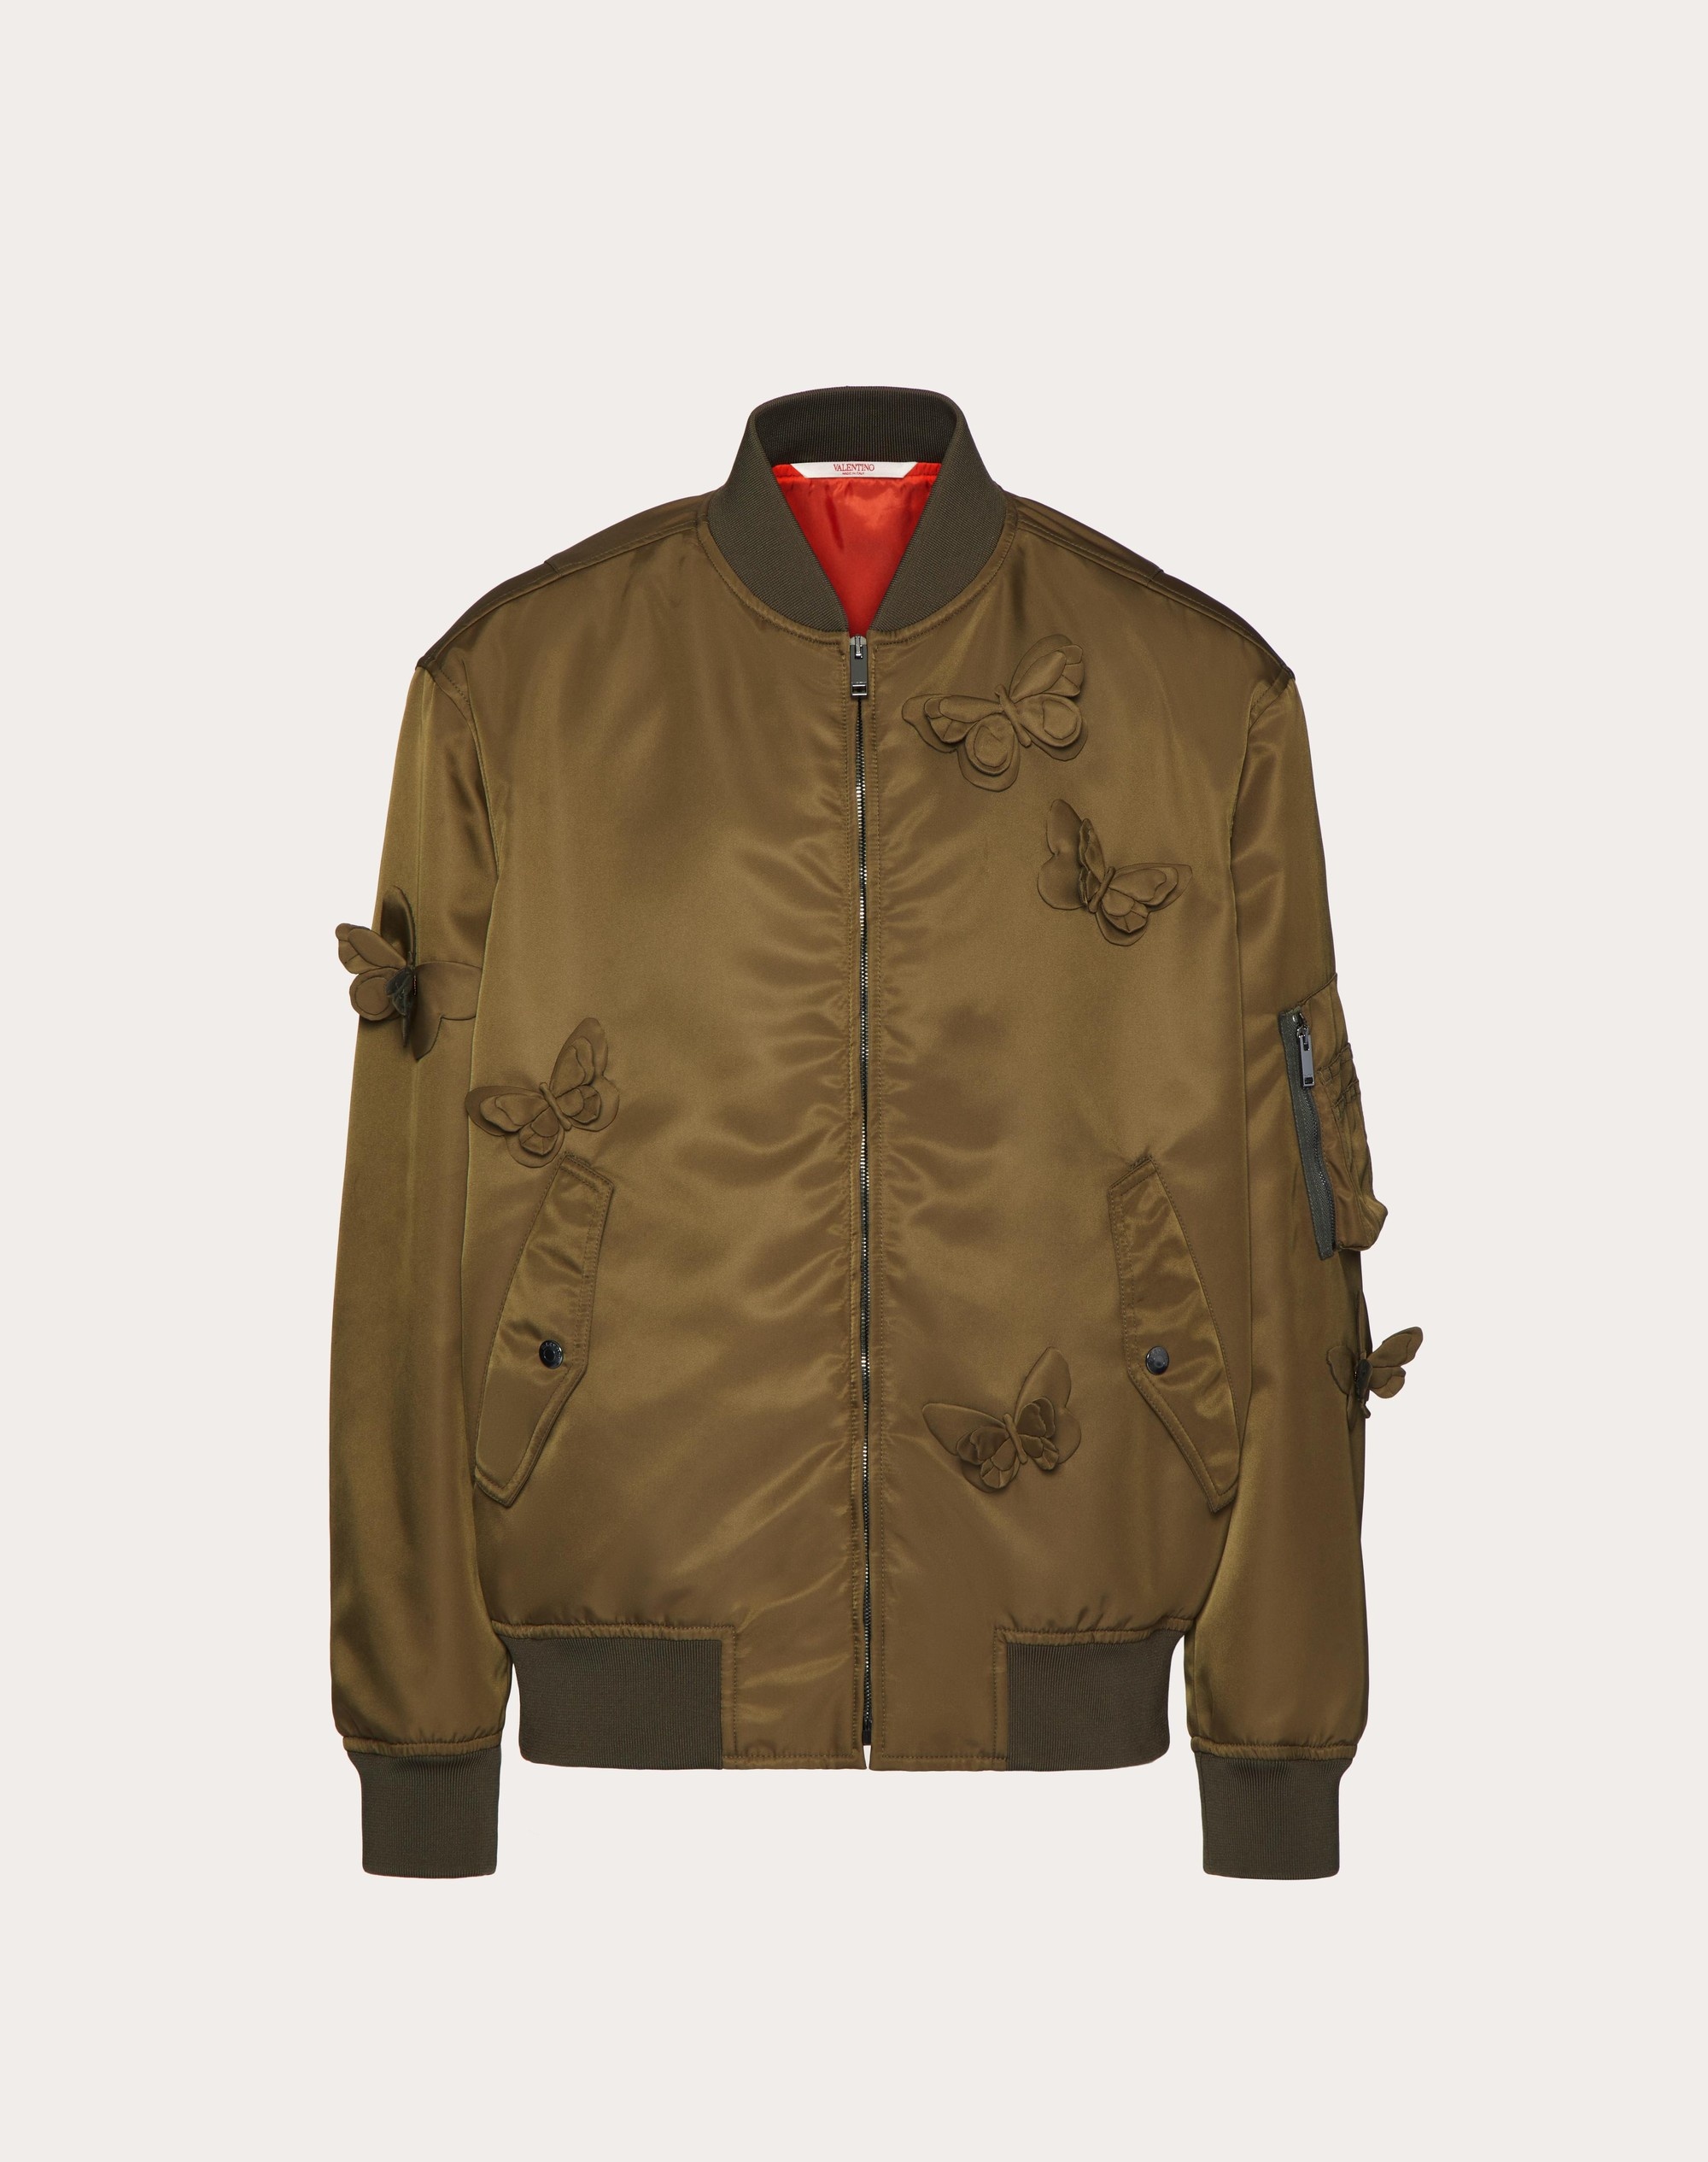 NYLON BOMBER JACKET WITH EMBROIDERED BUTTERFLIES - 1